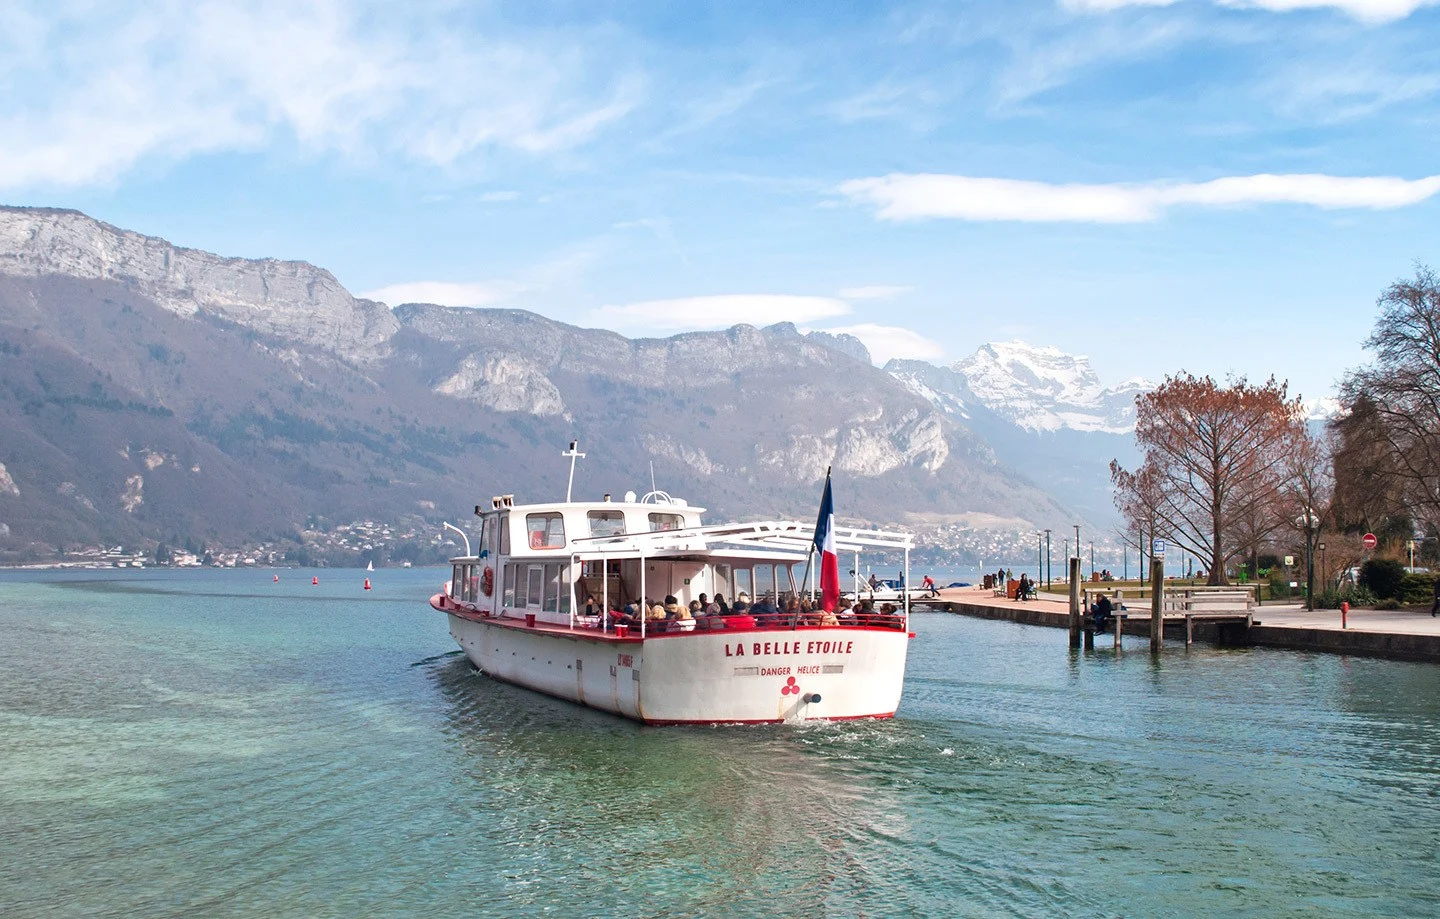 Boats on Lake Annecy in France